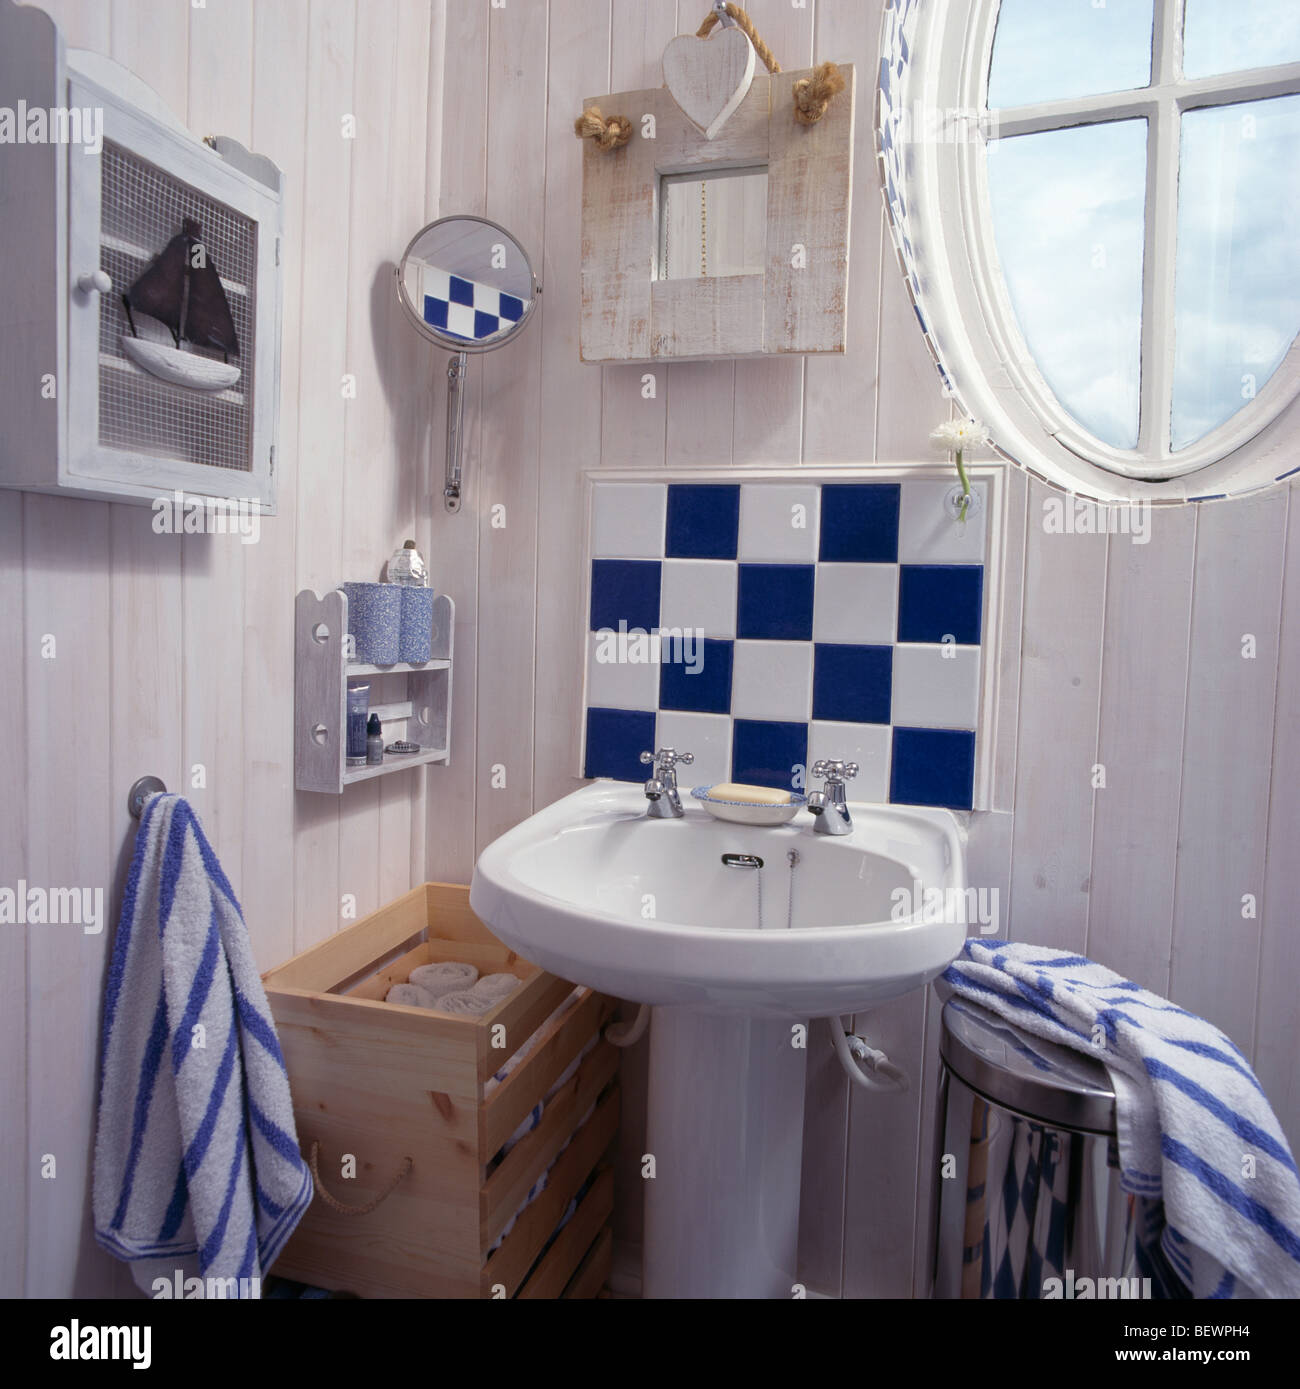 Blue White Tiles Above White Pedestal Basin In Small Seaside Themed Bathroom With Lime Washed Panelled Walls Stock Photo Alamy